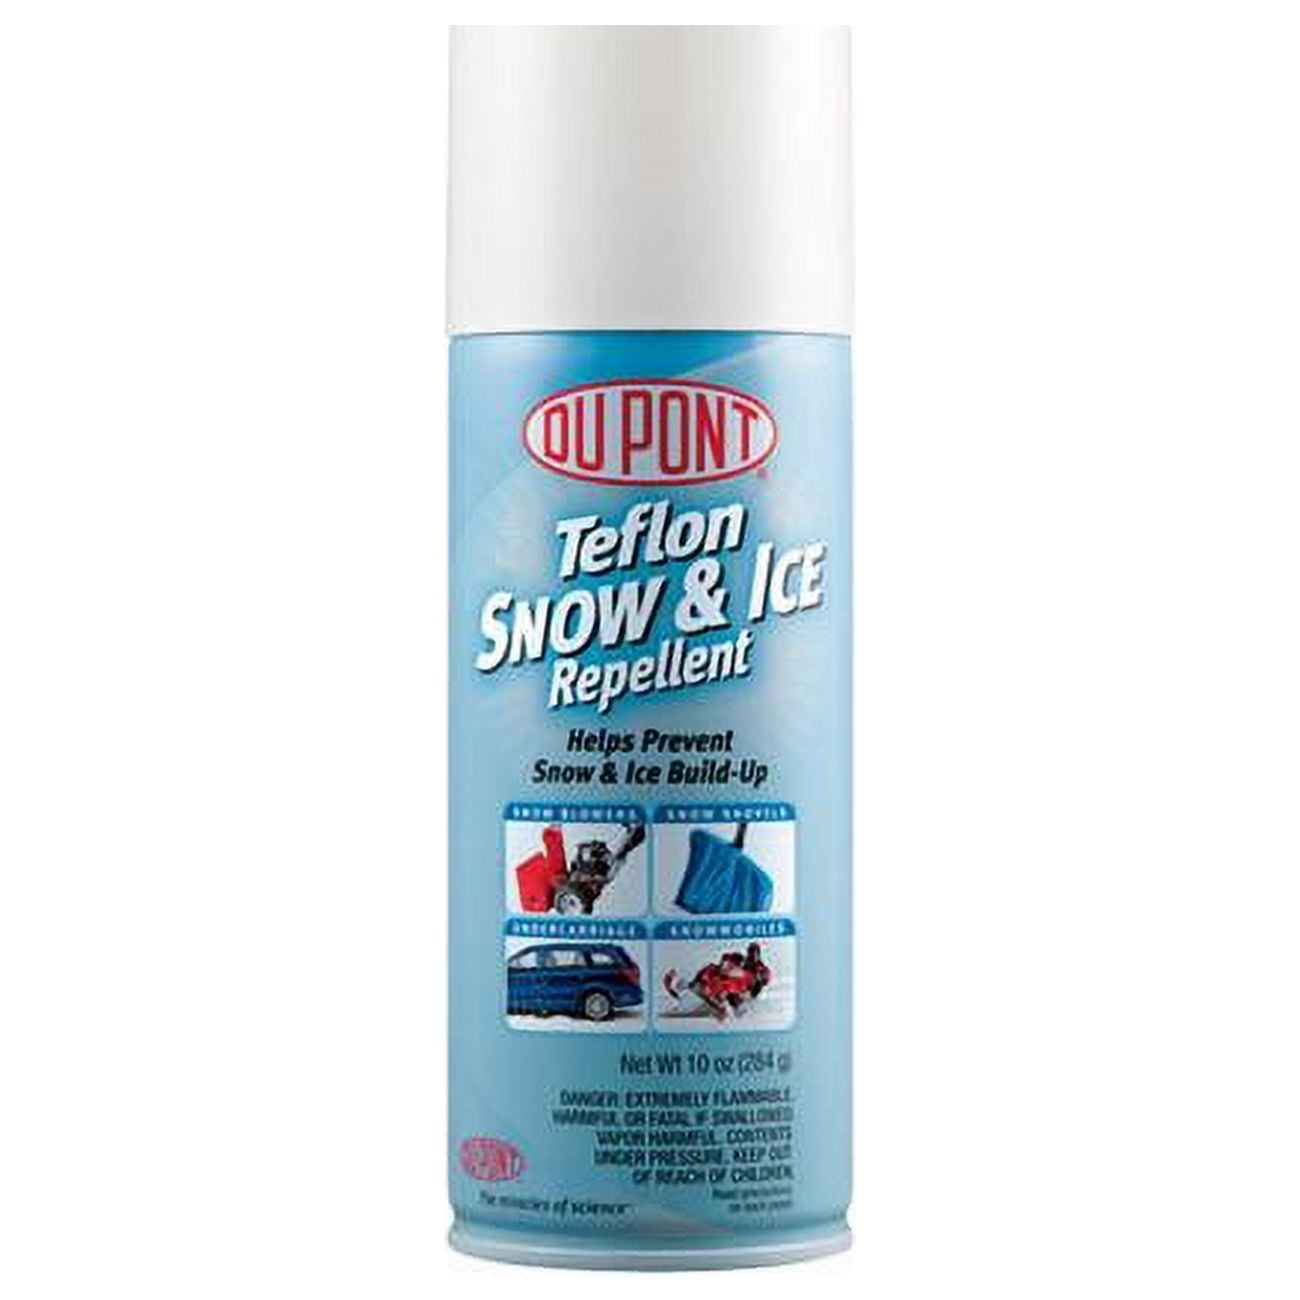 Dupont Teflon Snow and Ice Repellent 10 oz